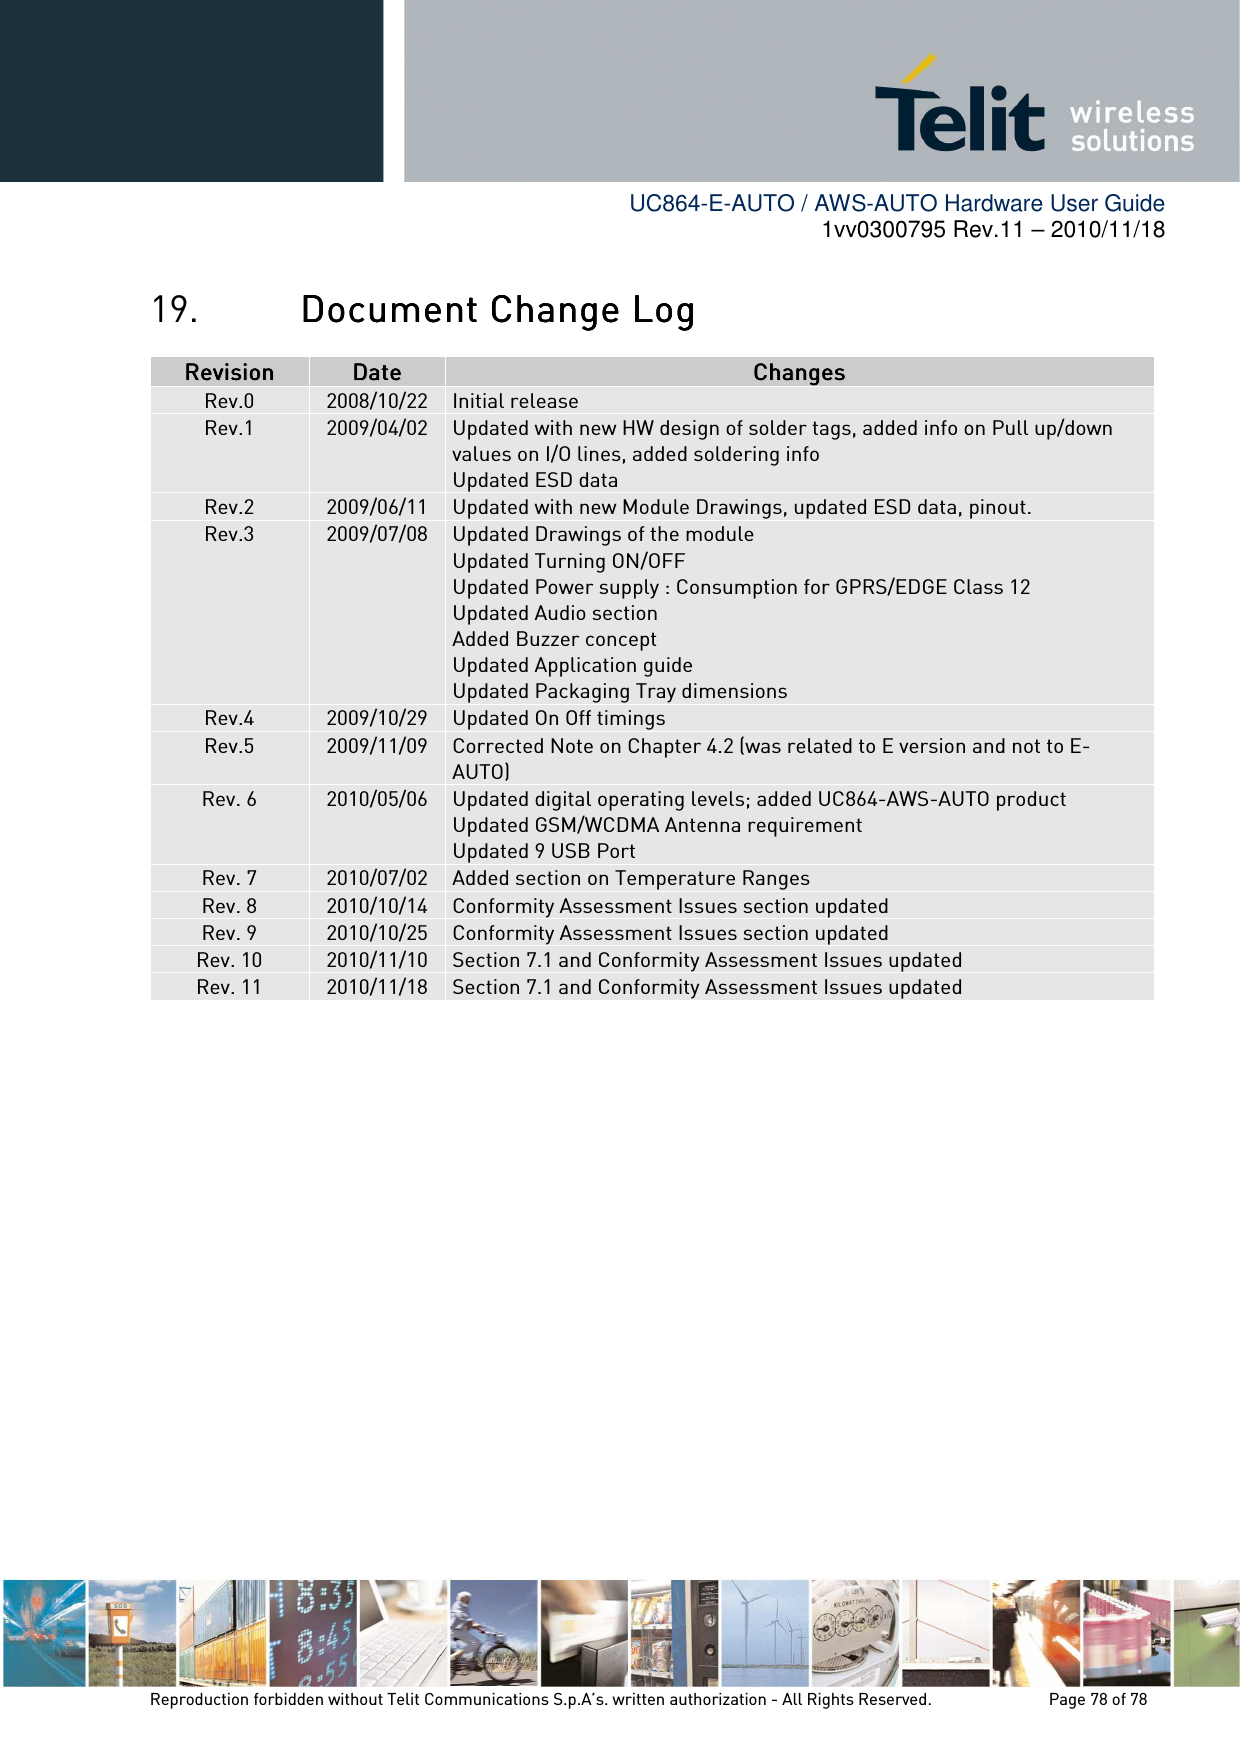        UC864-E-AUTO / AWS-AUTO Hardware User Guide 1vv0300795 Rev.11 – 2010/11/18     Reproduction forbidden without Telit Communications S.p.A’s. written authorization - All Rights Reserved.    Page 78 of 78  19. Document Change LogDocument Change LogDocument Change LogDocument Change Log    RRRRRRRReeeeeeeevvvvvvvviiiiiiiissssssssiiiiiiiioooooooonnnnnnnn        DDDDDDDDaaaaaaaatttttttteeeeeeee        CCCCCCCChhhhhhhhaaaaaaaannnnnnnnggggggggeeeeeeeessssssss        Rev.0  2008/10/22  Initial release Rev.1  2009/04/02  Updated with new HW design of solder tags, added info on Pull up/down values on I/O lines, added soldering info Updated ESD data Rev.2  2009/06/11 Updated with new Module Drawings, updated ESD data, pinout. Rev.3  2009/07/08  Updated Drawings of the module Updated Turning ON/OFF Updated Power supply : Consumption for GPRS/EDGE Class 12 Updated Audio section Added Buzzer concept Updated Application guide Updated Packaging Tray dimensions Rev.4  2009/10/29  Updated On Off timings Rev.5  2009/11/09  Corrected Note on Chapter 4.2 (was related to E version and not to E-AUTO) Rev. 6  2010/05/06  Updated digital operating levels; added UC864-AWS-AUTO product Updated GSM/WCDMA Antenna requirement Updated 9 USB Port Rev. 7  2010/07/02  Added section on Temperature Ranges Rev. 8  2010/10/14  Conformity Assessment Issues section updated Rev. 9  2010/10/25  Conformity Assessment Issues section updated Rev. 10  2010/11/10  Section 7.1 and Conformity Assessment Issues updated Rev. 11  2010/11/18  Section 7.1 and Conformity Assessment Issues updated  